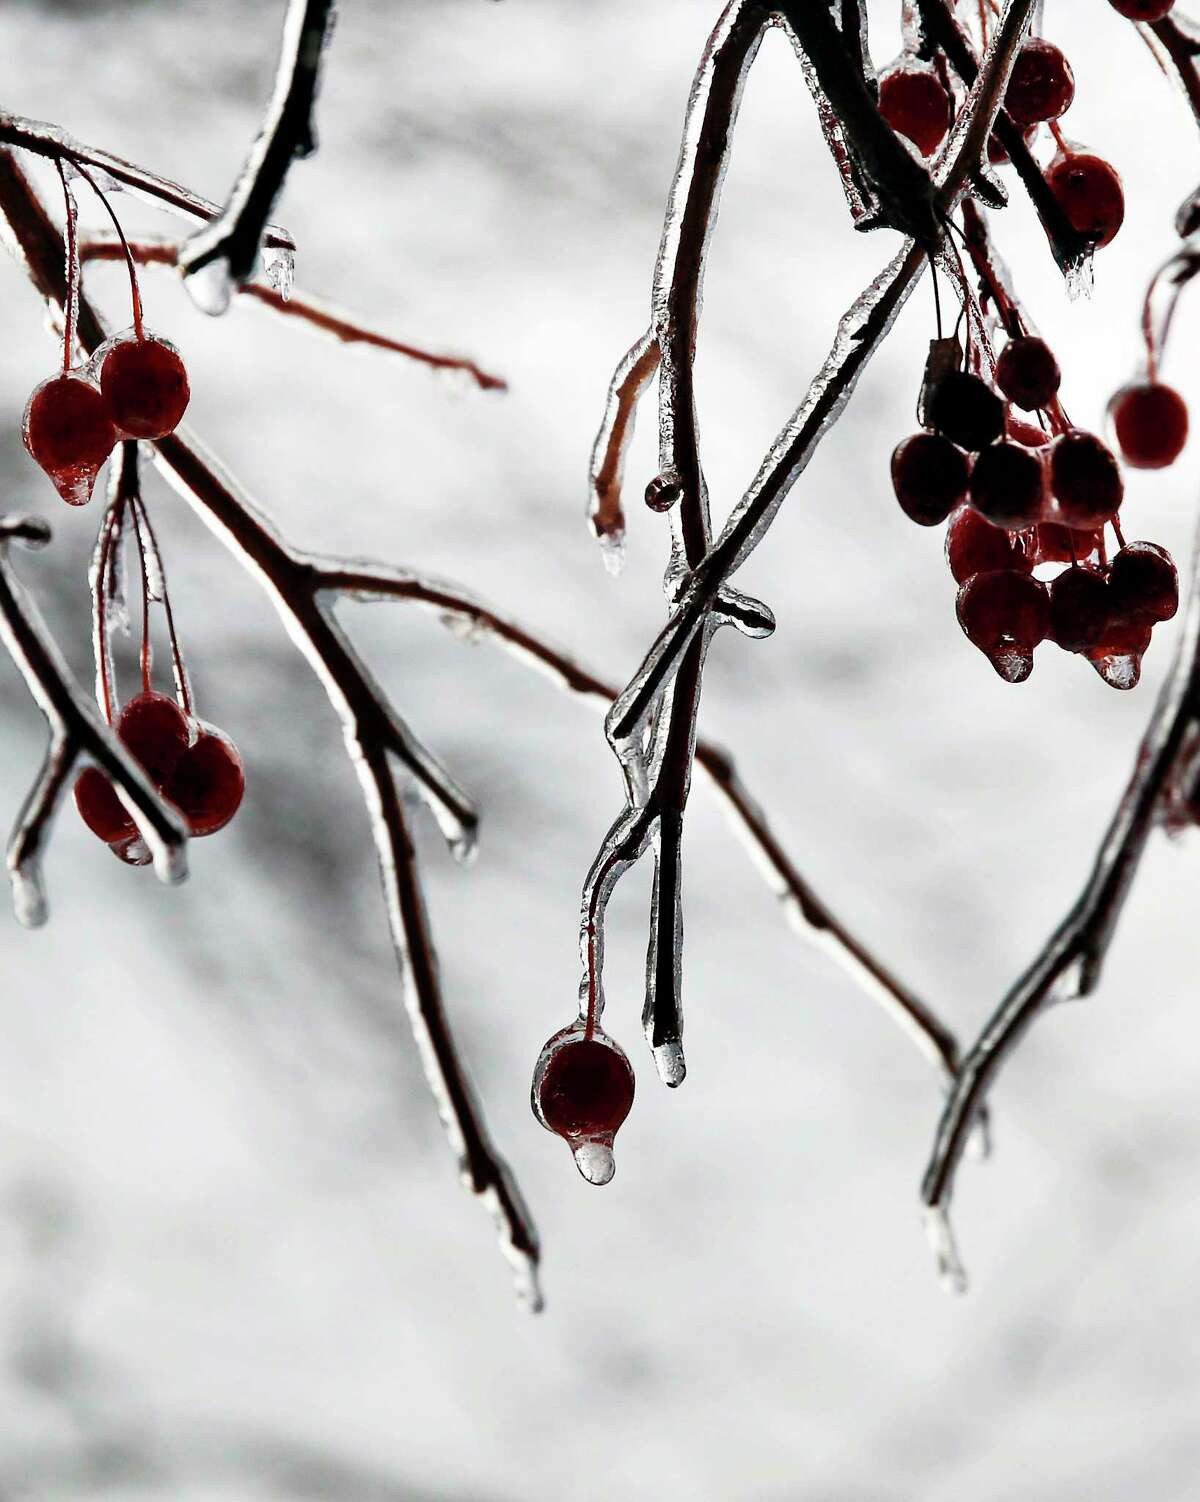 Remaining berries of winter are a valuable food source for a variety of birds.